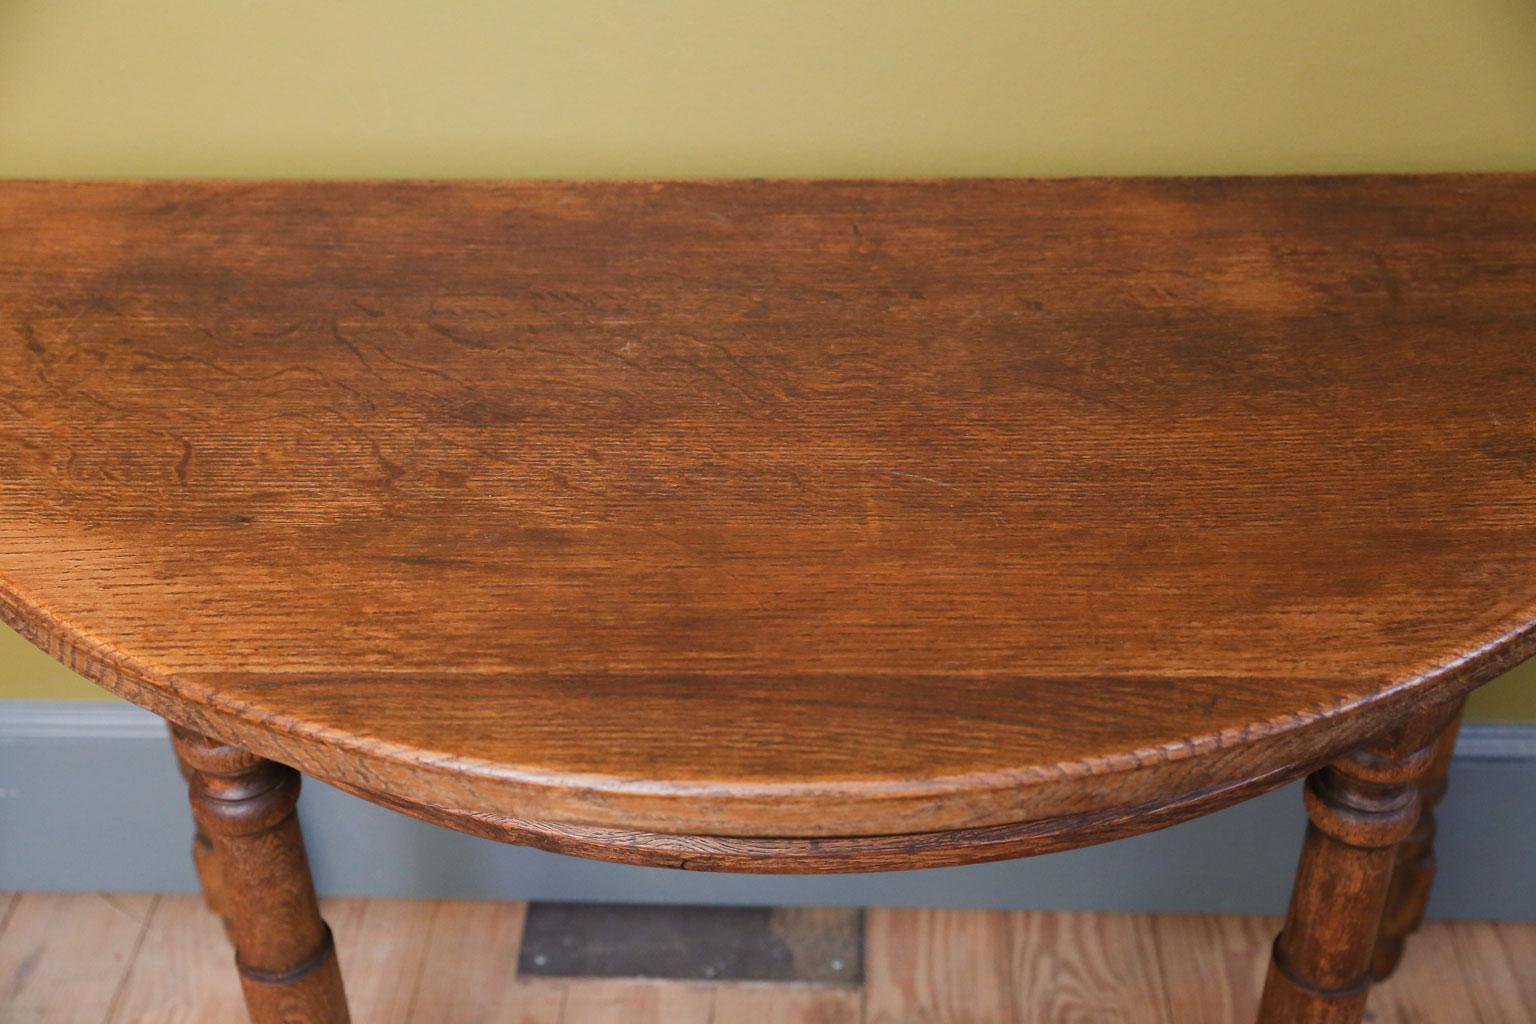 Belgian Pair of Heavy Oak Demilune Tables with Turned Legs